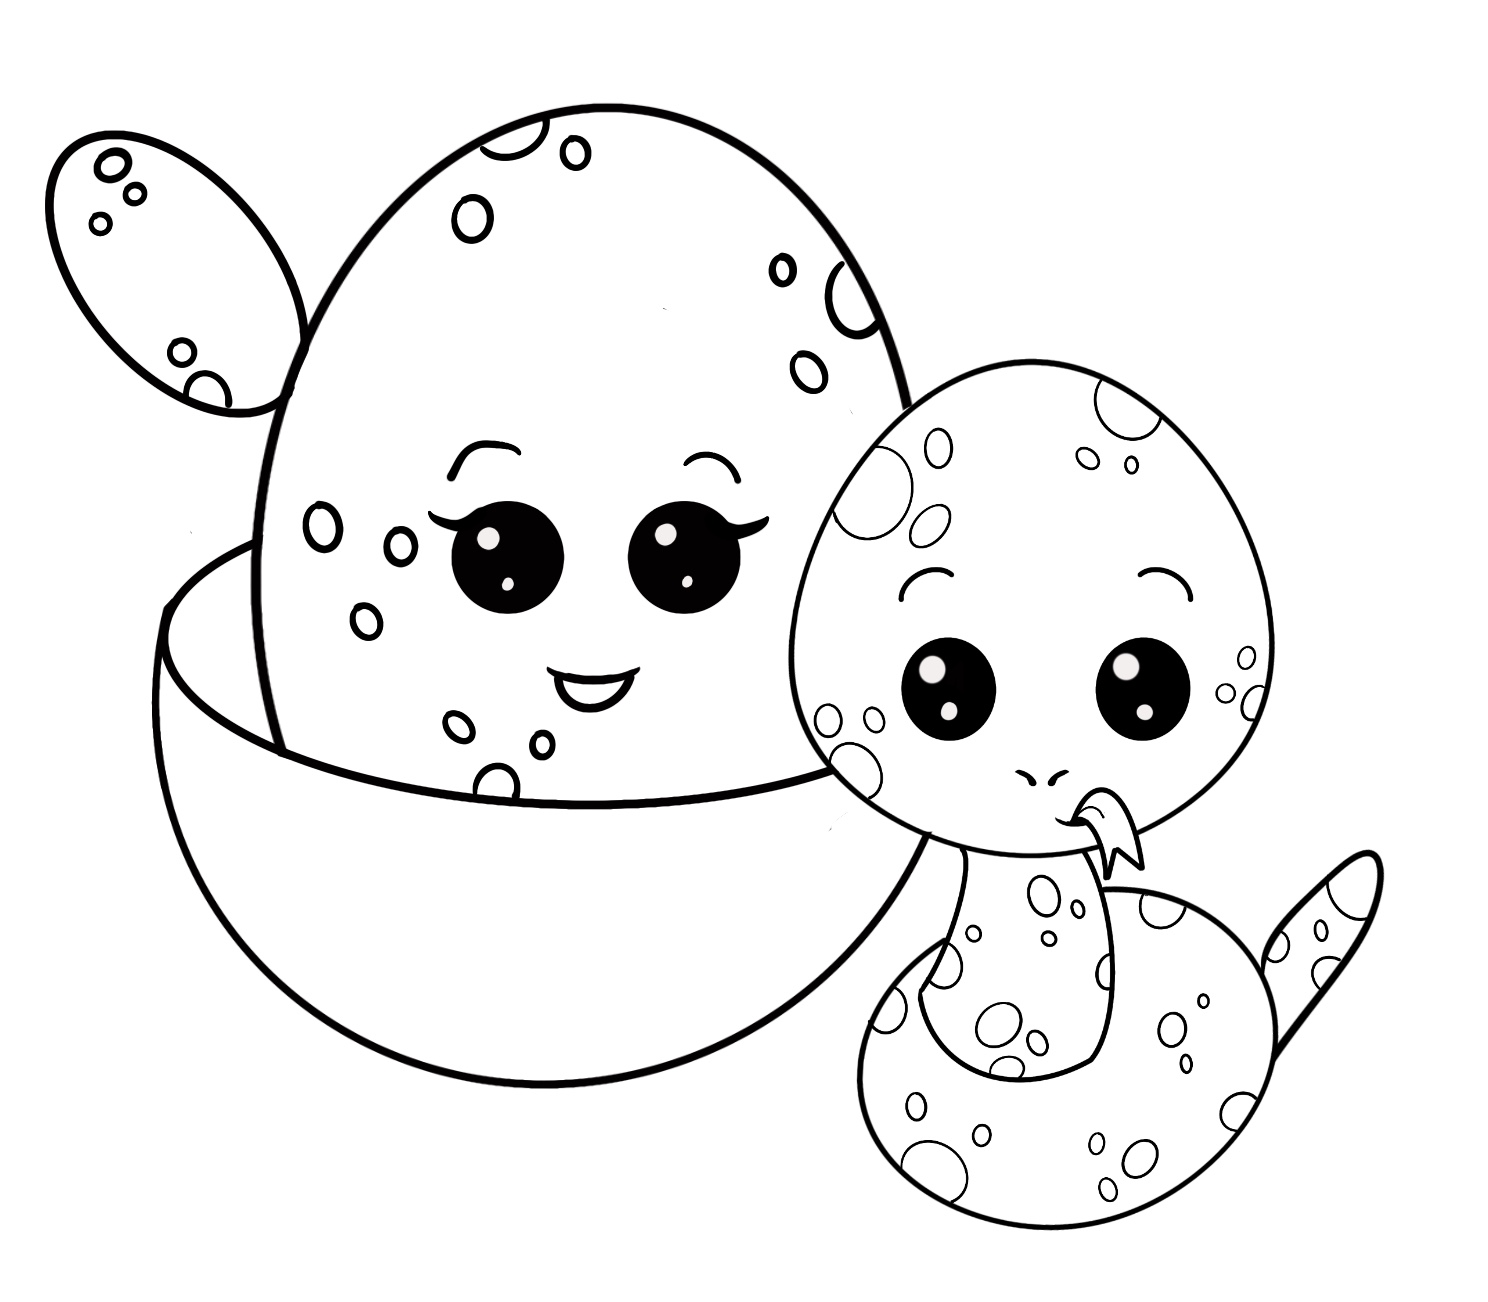 Download Coloring Pages For Procreate Free, Coloring Pages For Ipad ...